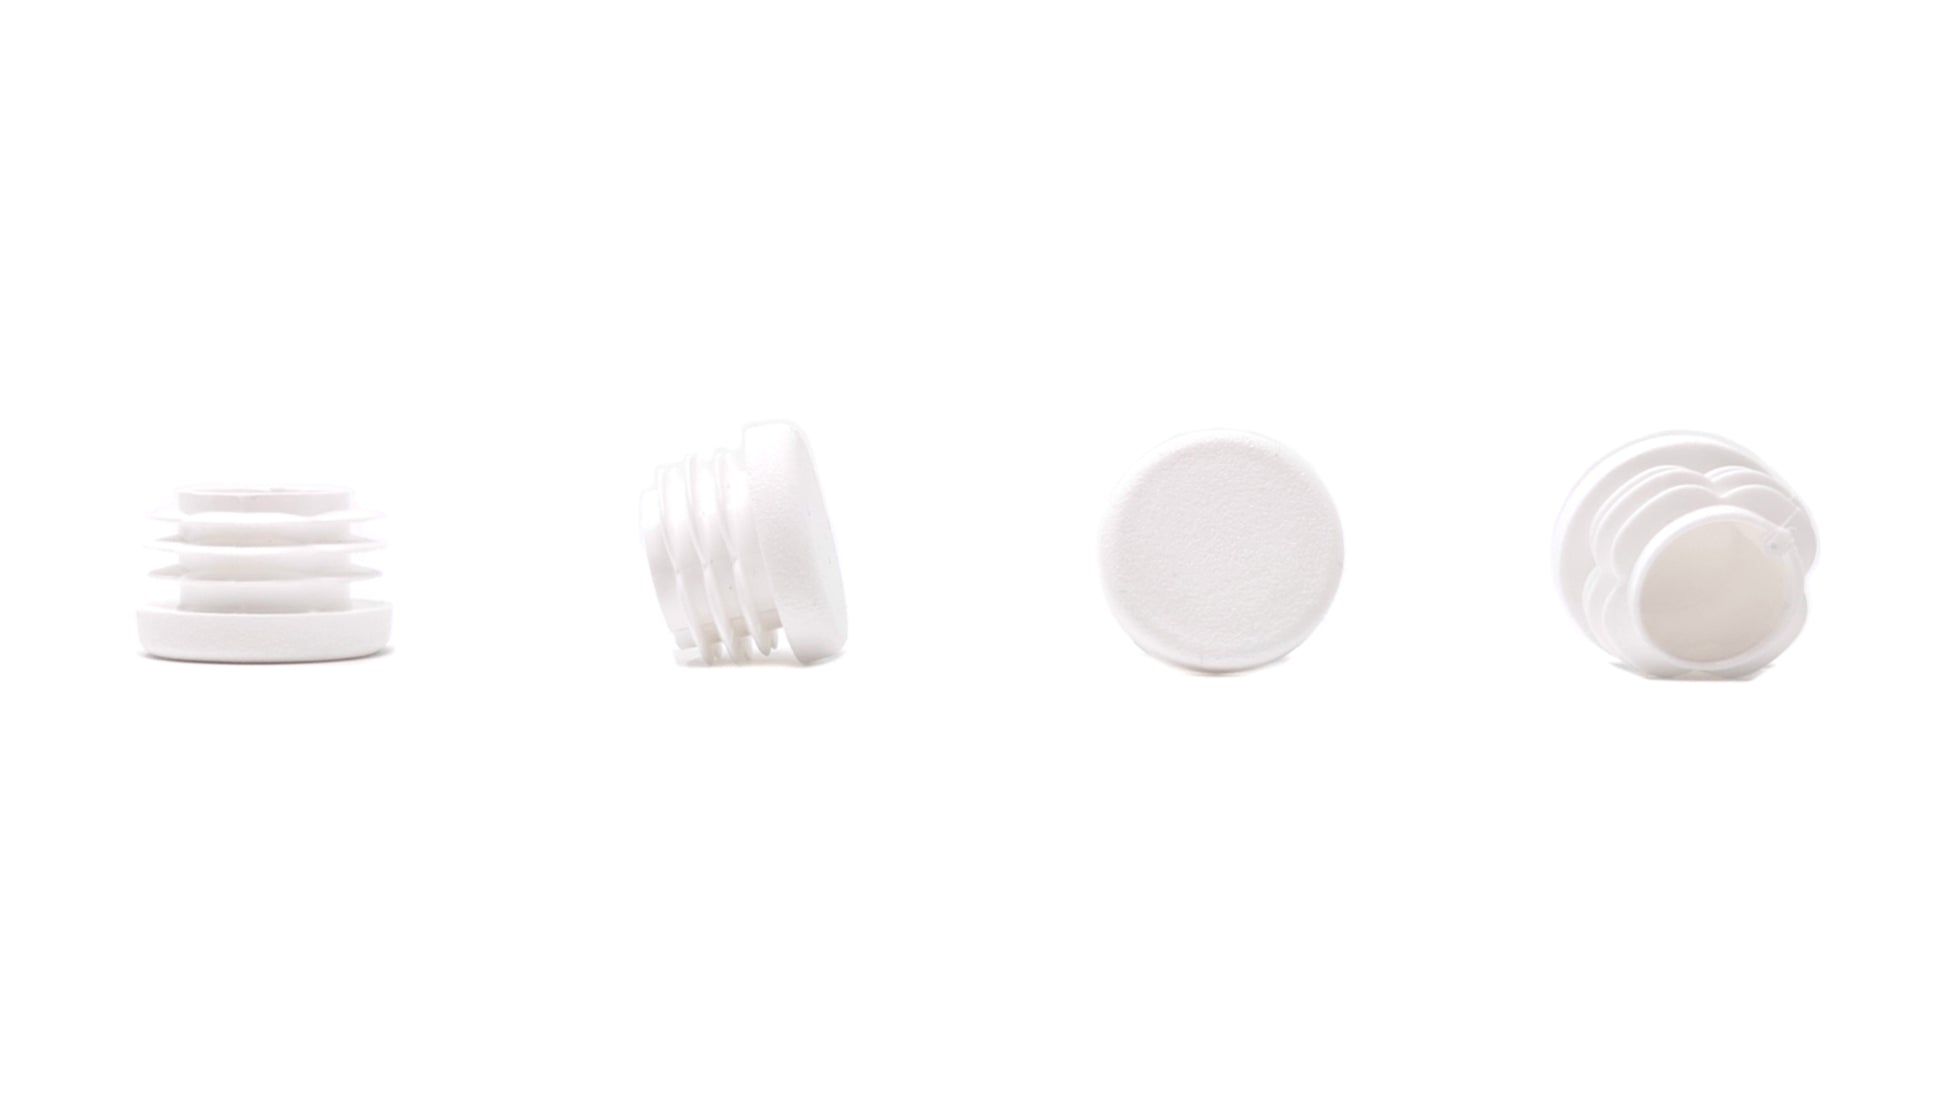 Round Tube Inserts 25mm White | Made in Germany | Keay Vital Parts - Keay Vital Parts